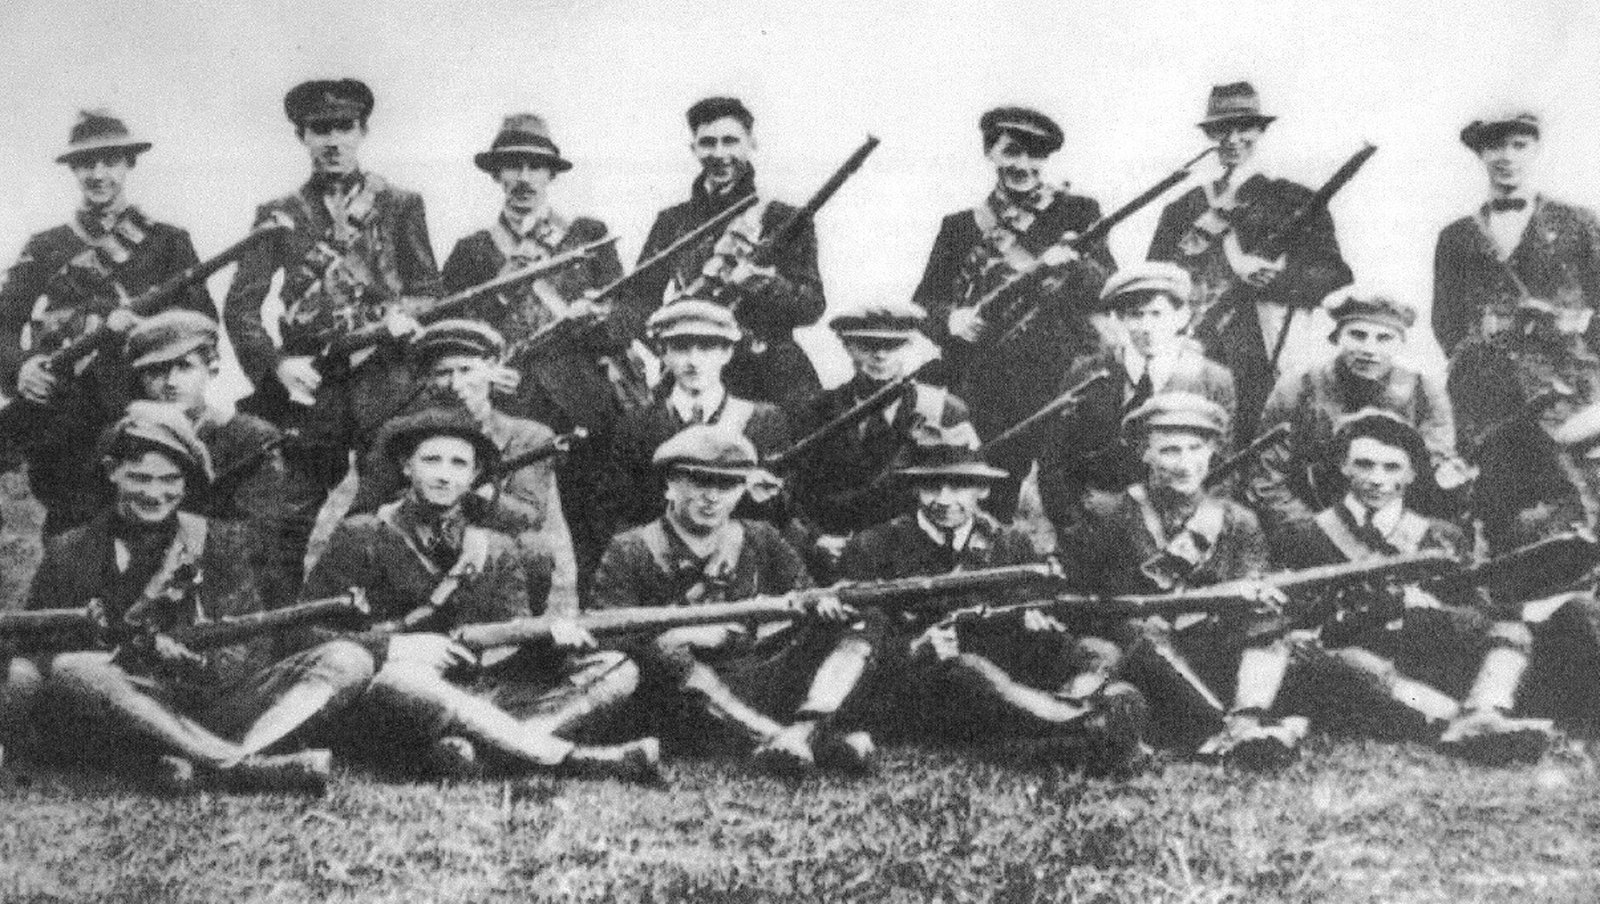 Image - Sean Hogan's Flying Column, 3rd Tipperary Brigade IRA during the War of Independence